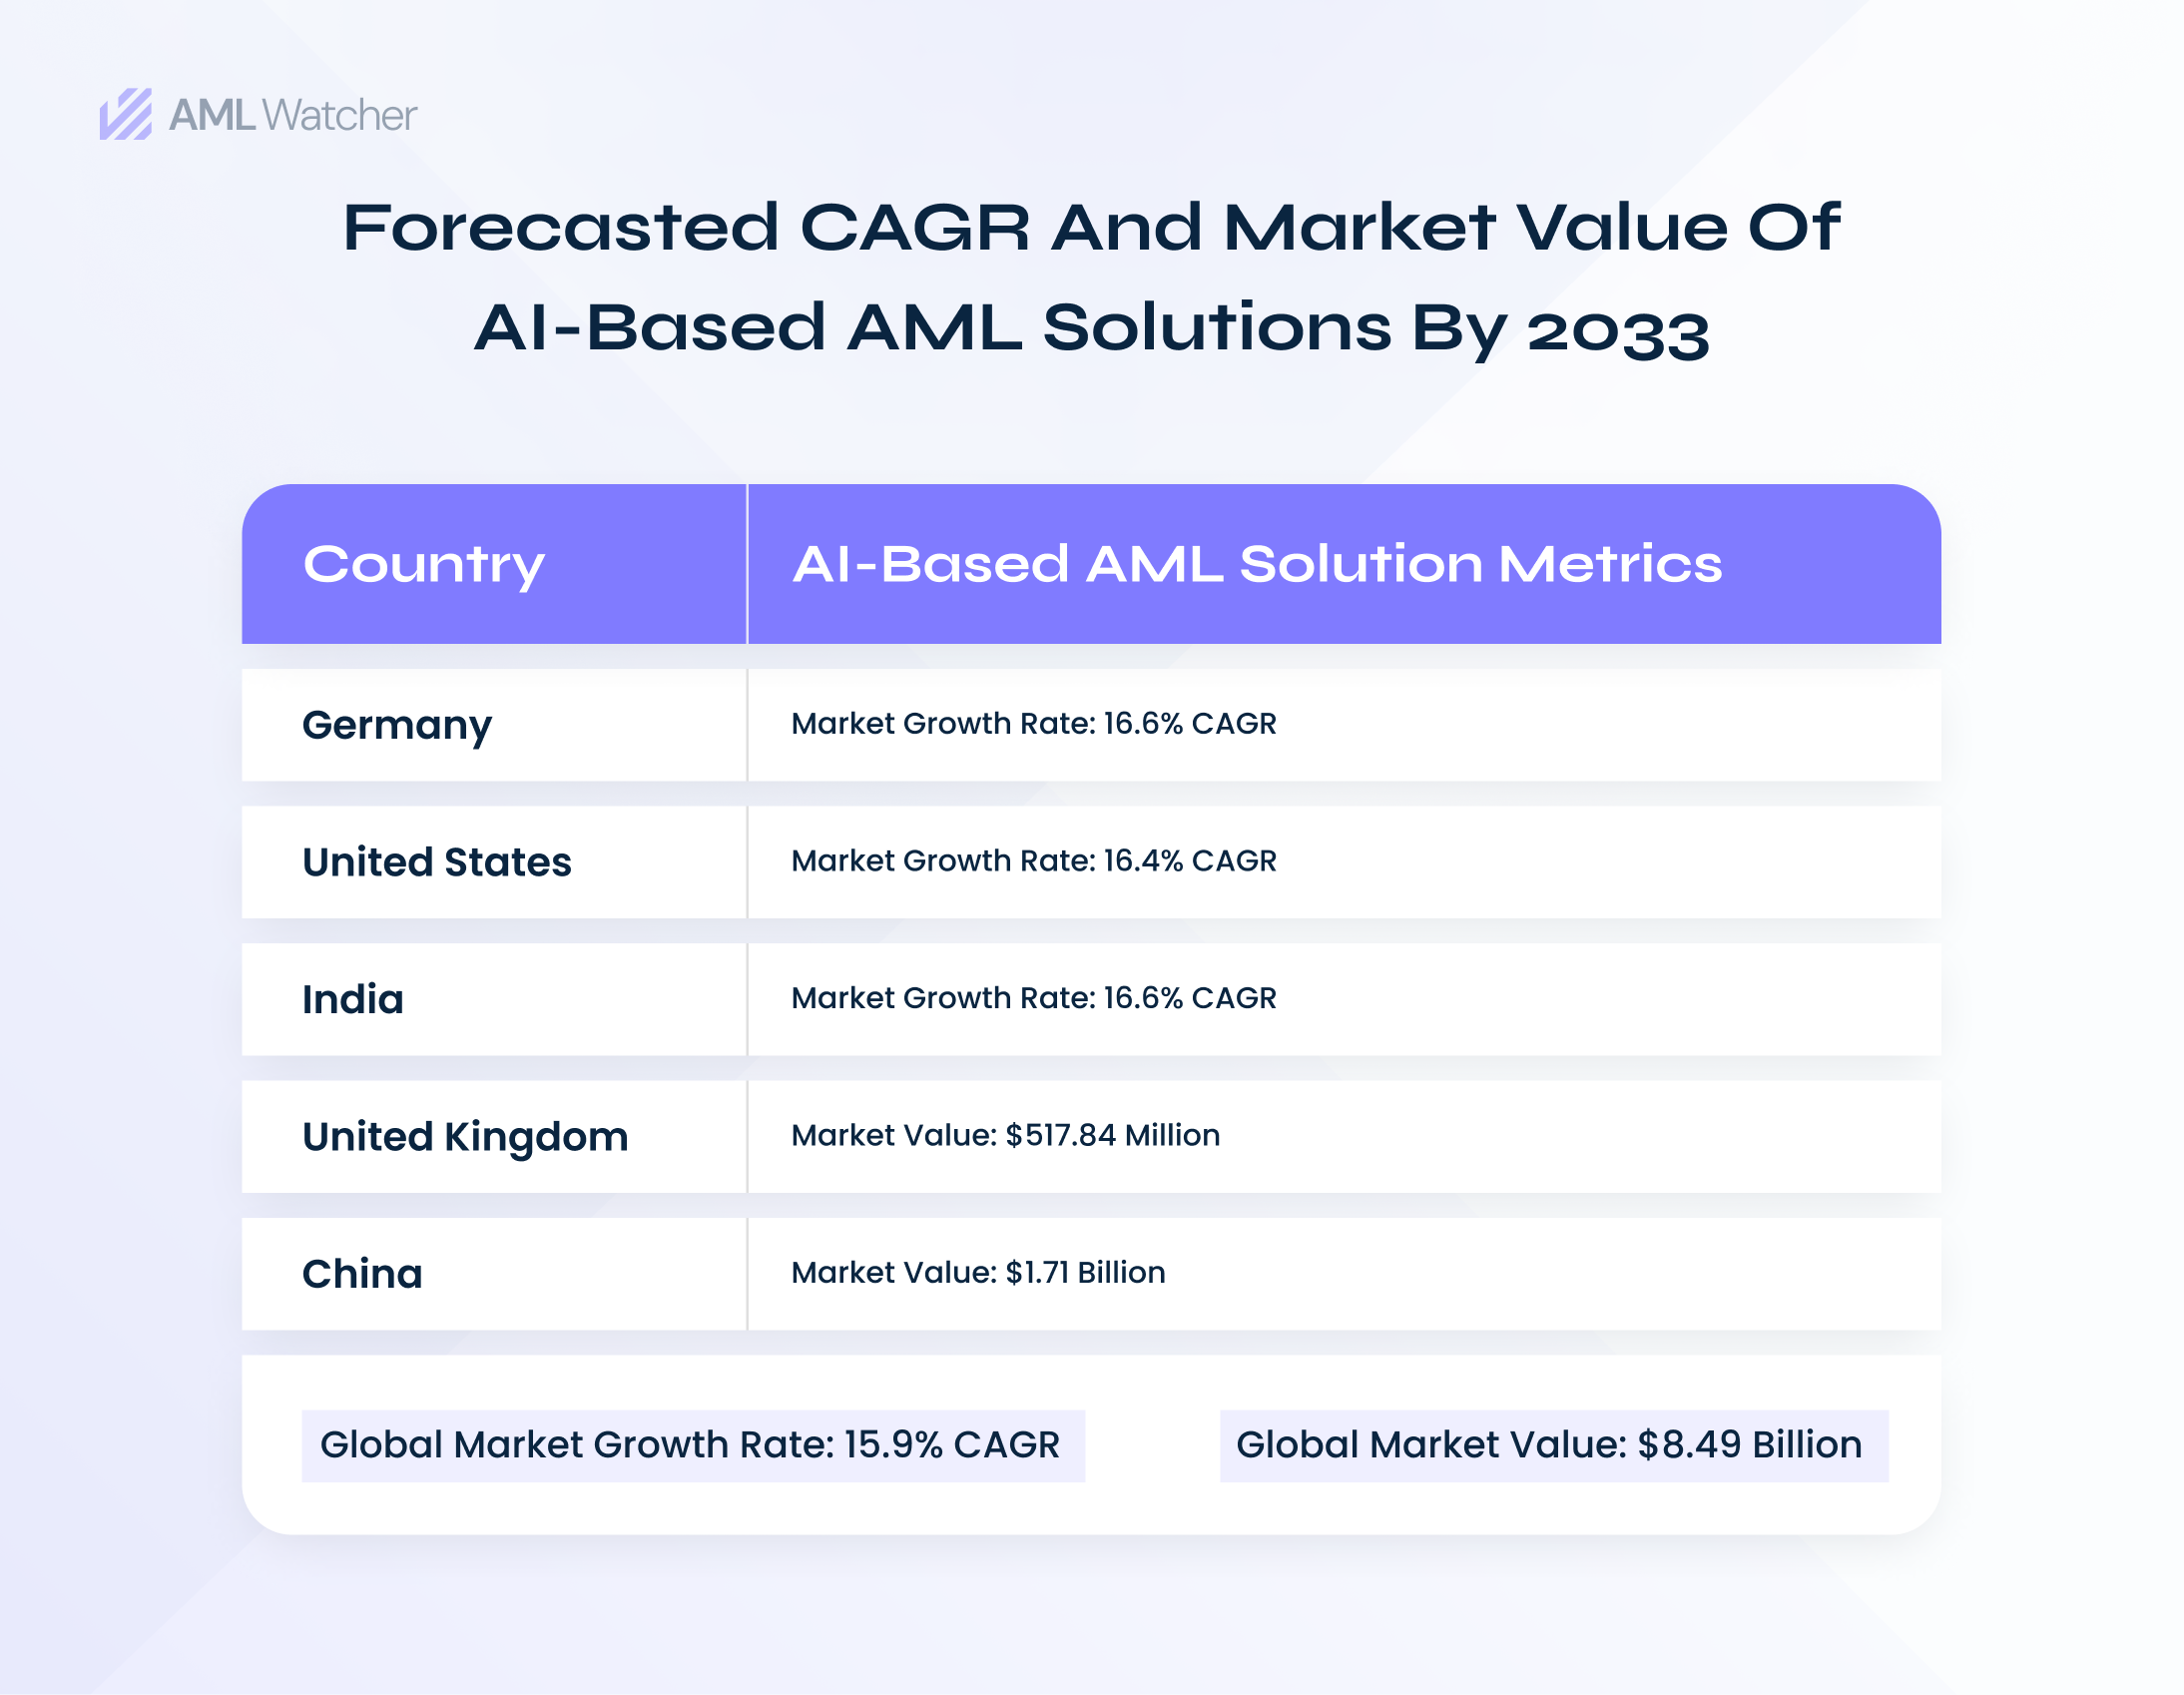 The featured image shows the predicted CAGR and market value of AML solutions using AI by the end of the year 2033.